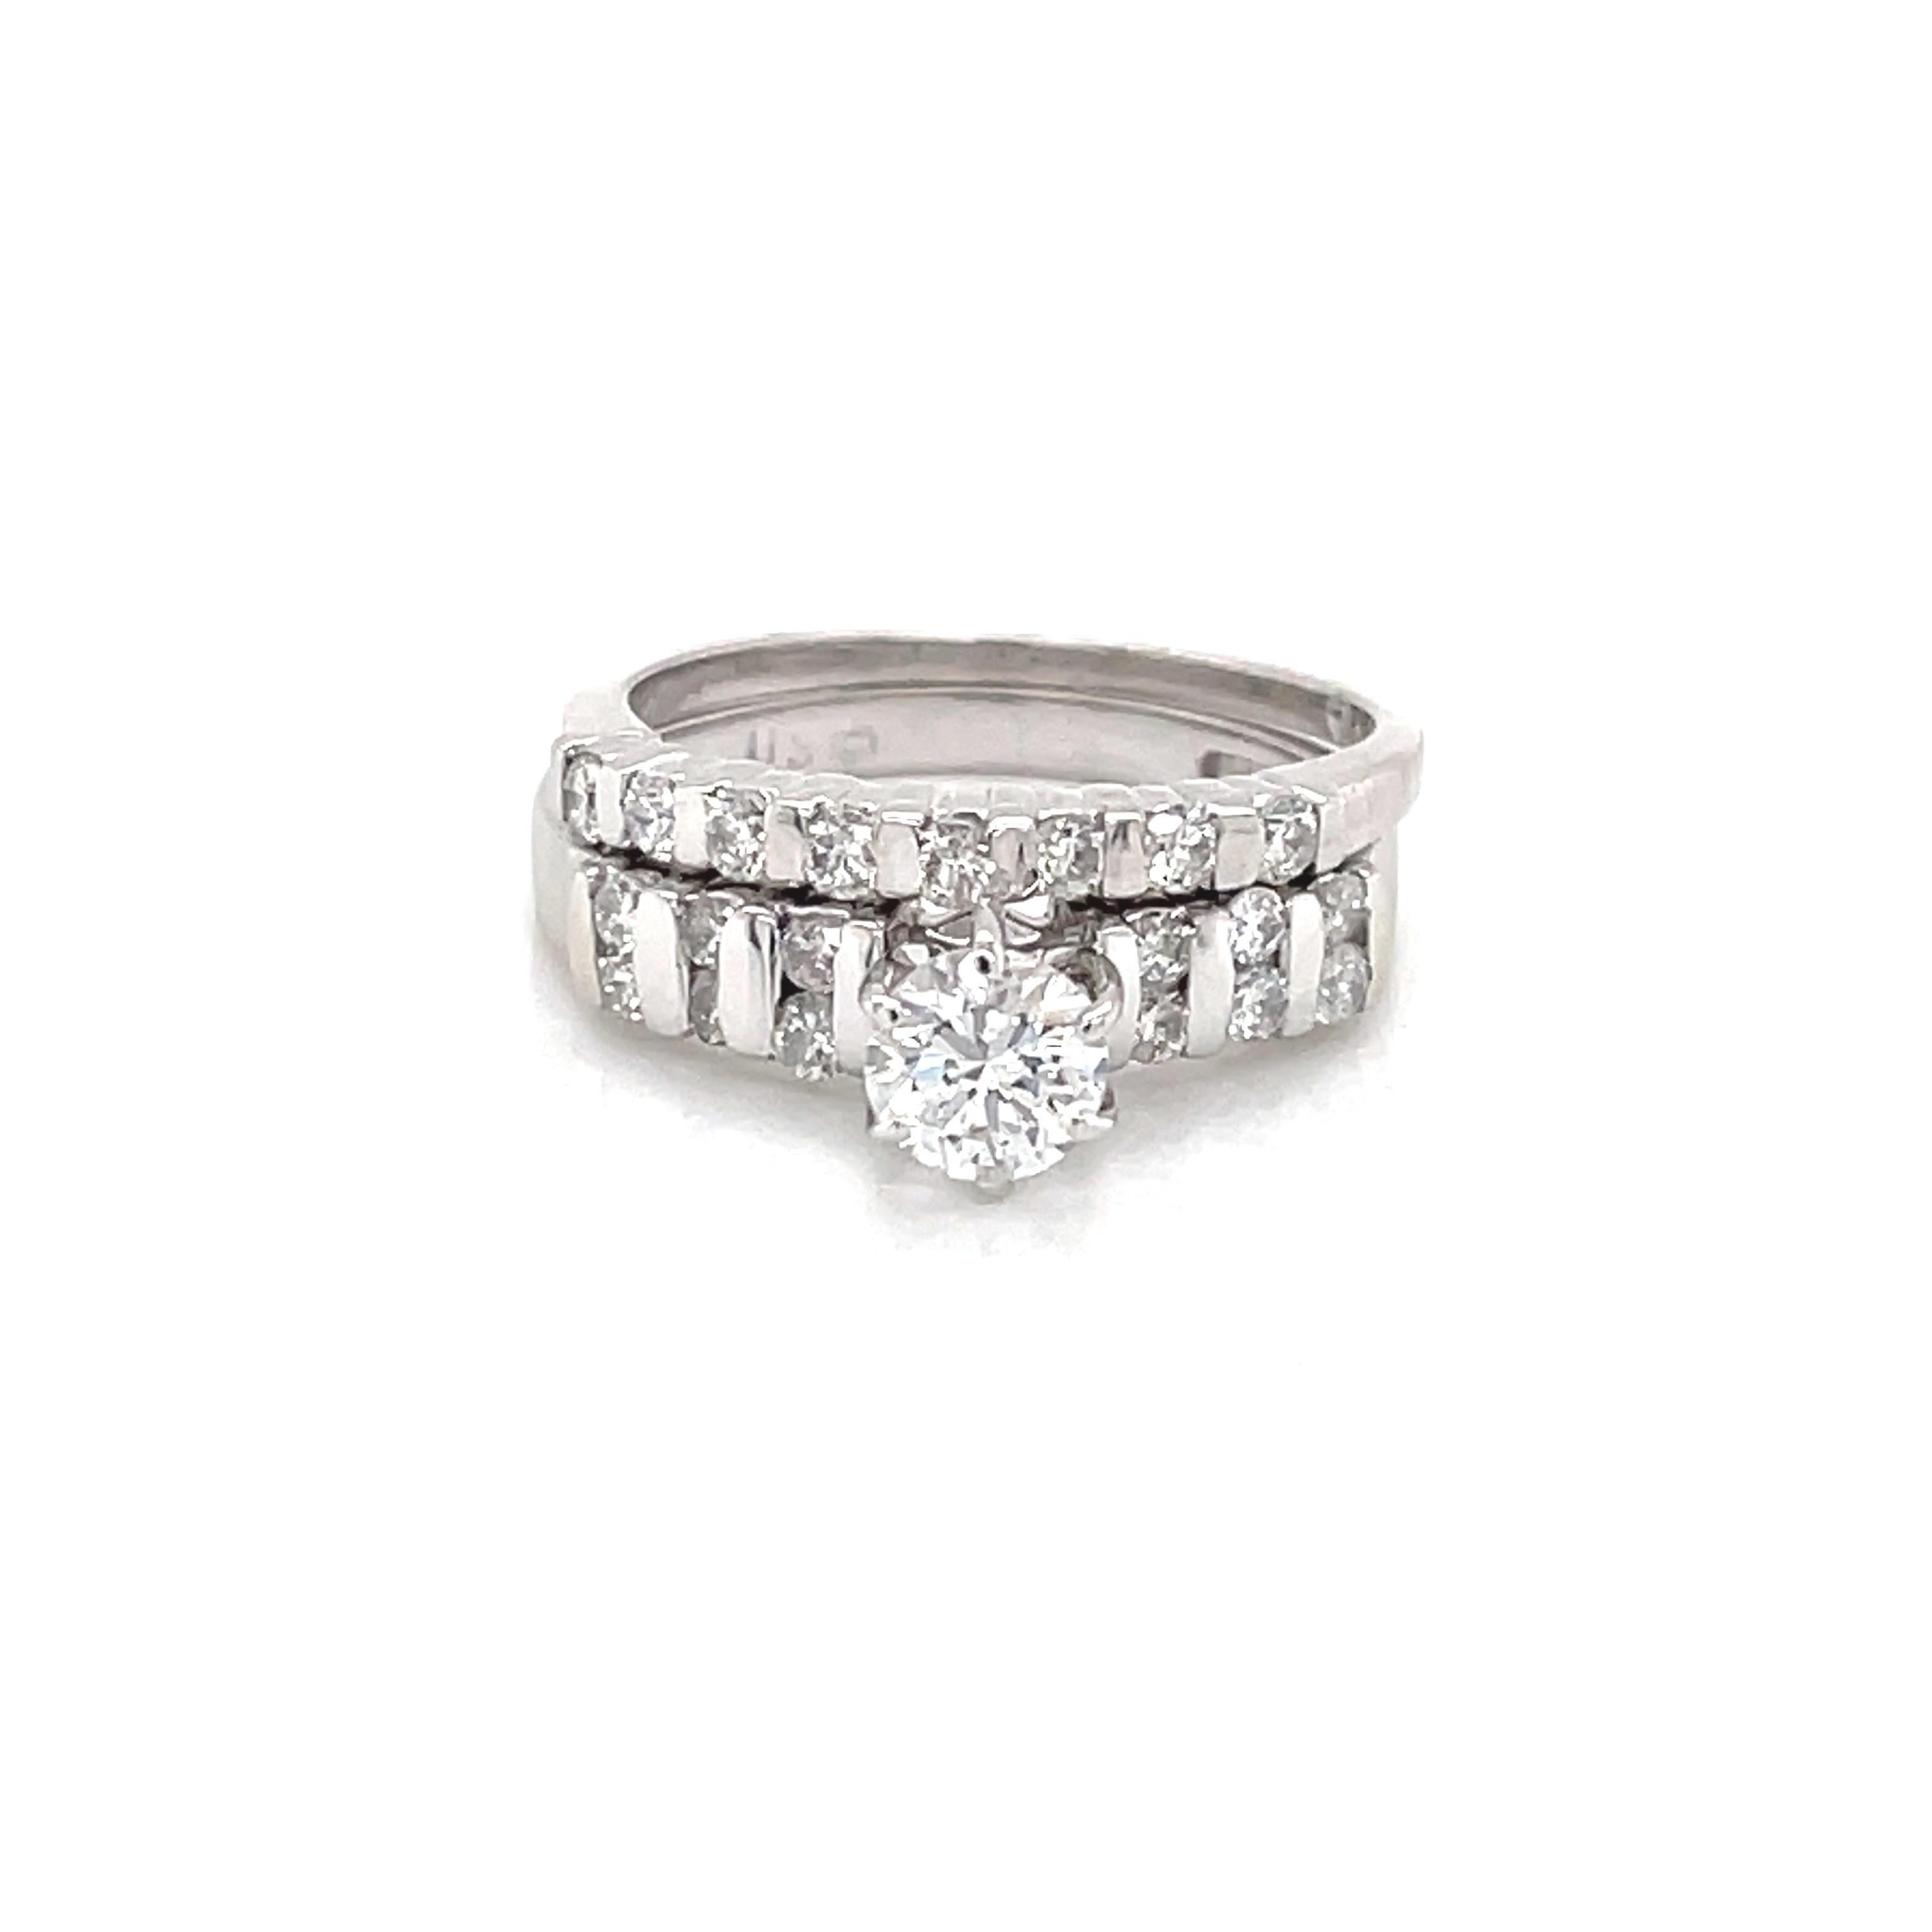 A sparkling .45 carat round faceted H/SI center diamond is flanked by a total of twelve round faceted .03  carat diamond accents that are twin set, vertically,  in 14 karat white gold for maximum impact. The accompanying band presents eight round